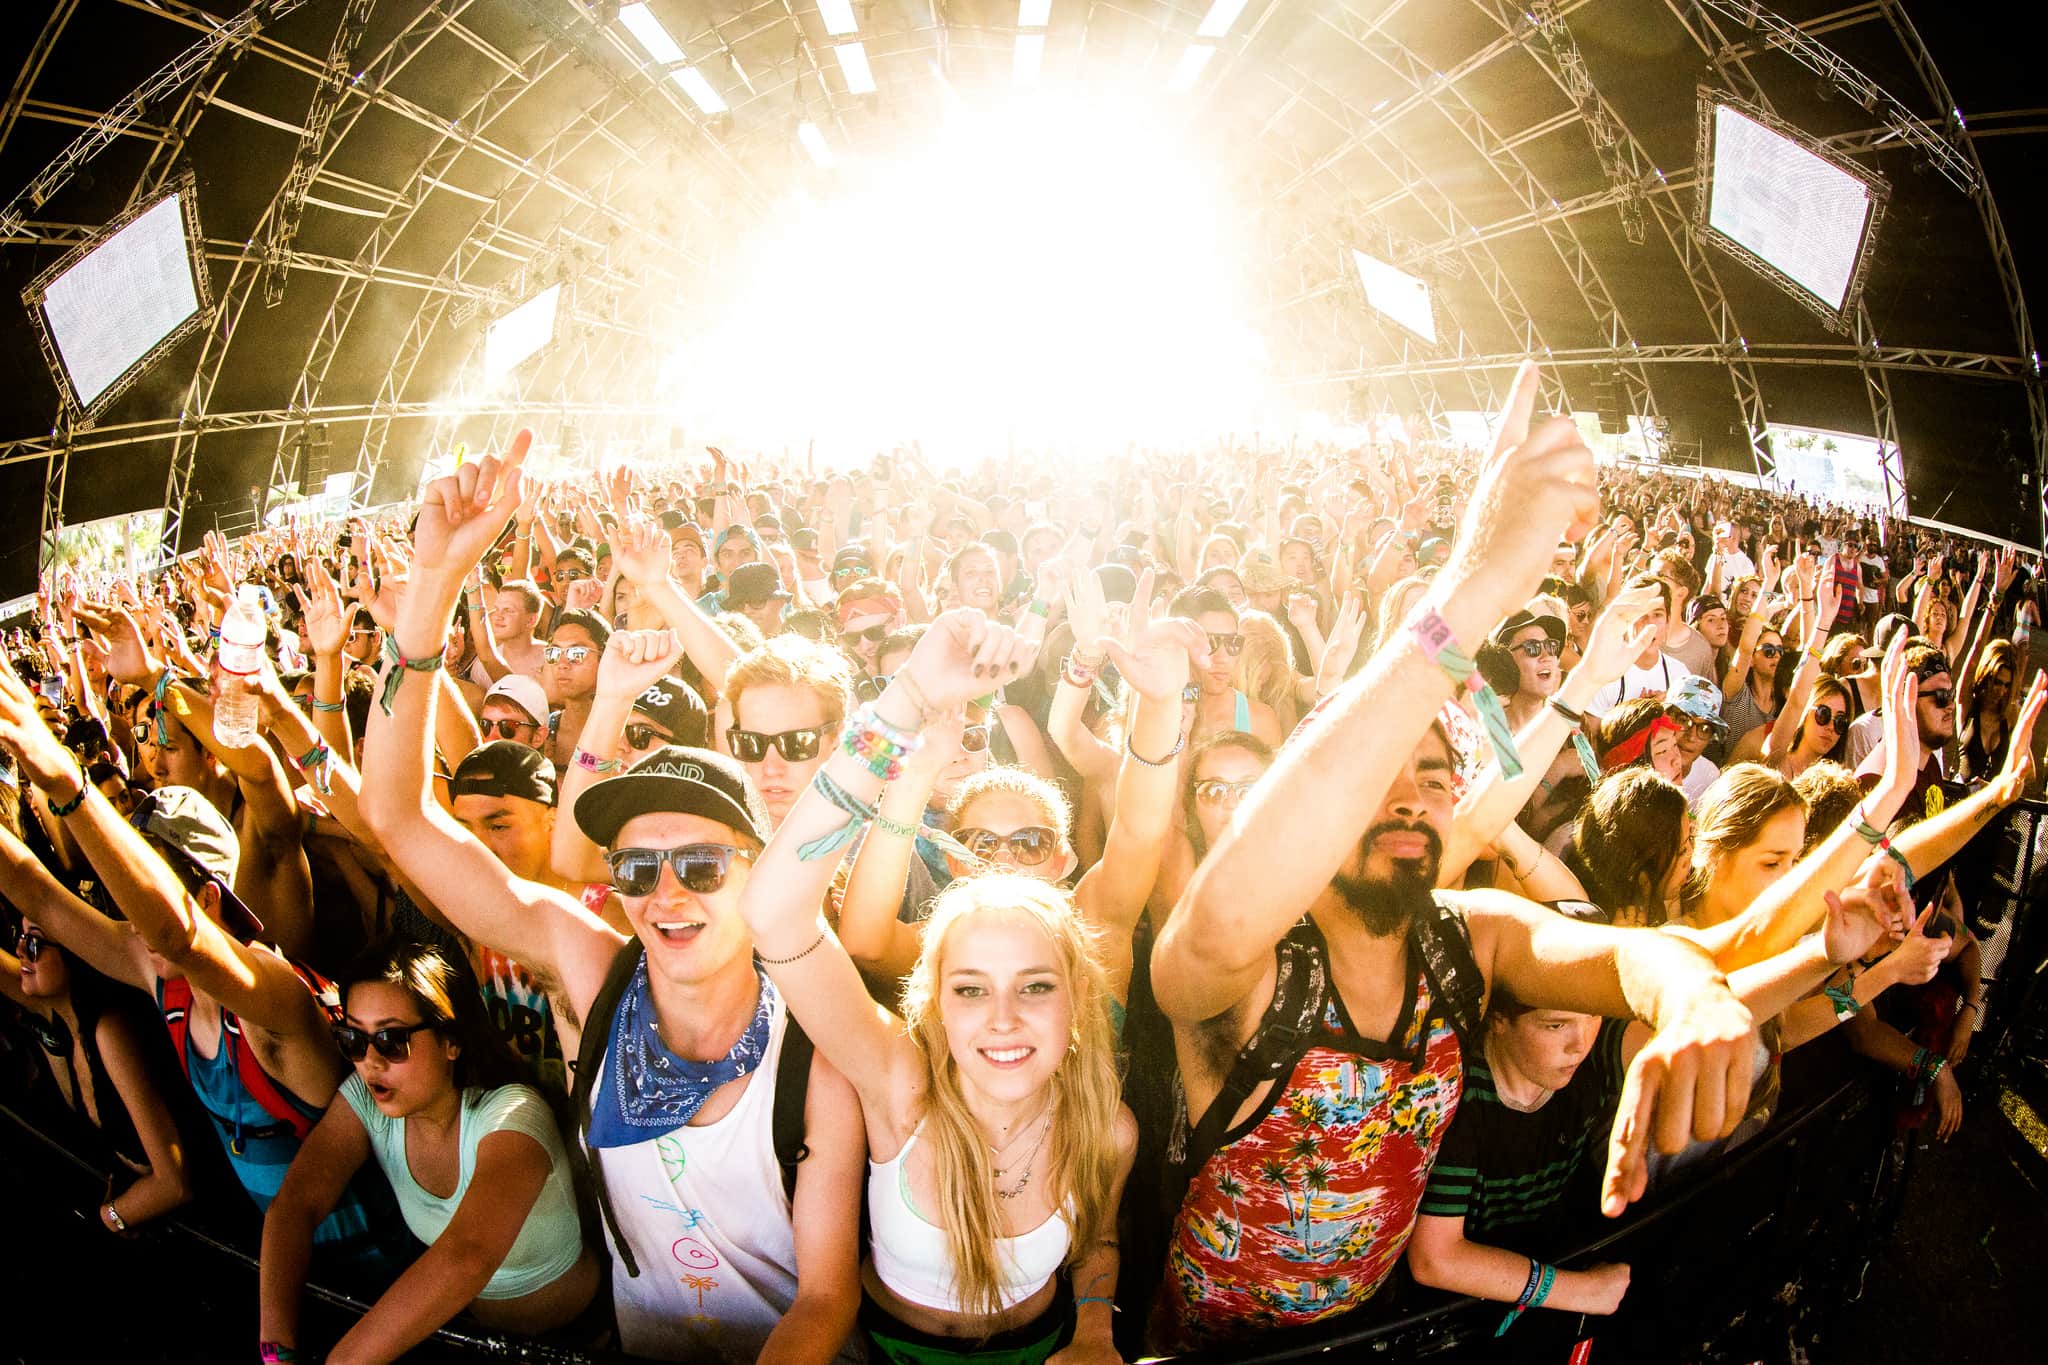 Keep one eye on your iPhone at Coachella.